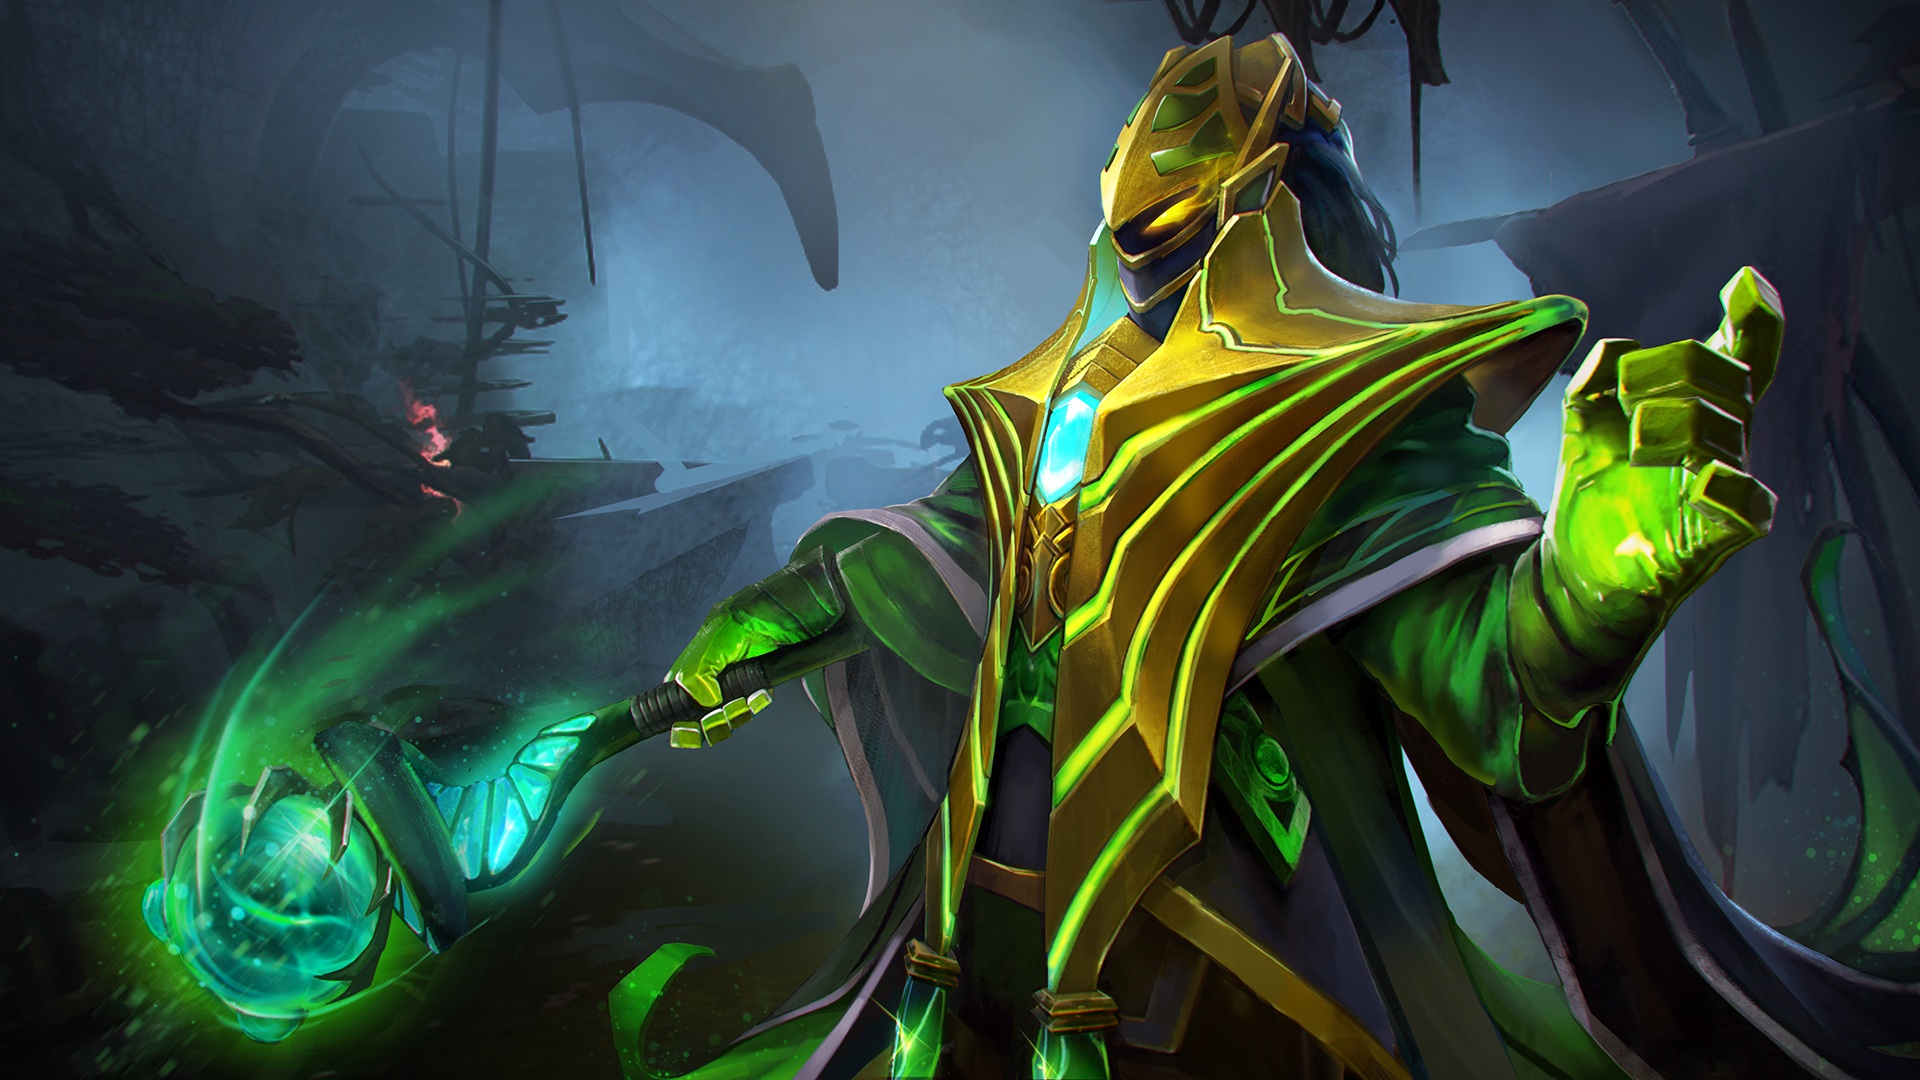 Rubick Sets Loading Screen Dota 2 Hd Wallpapers For Mobile Phones